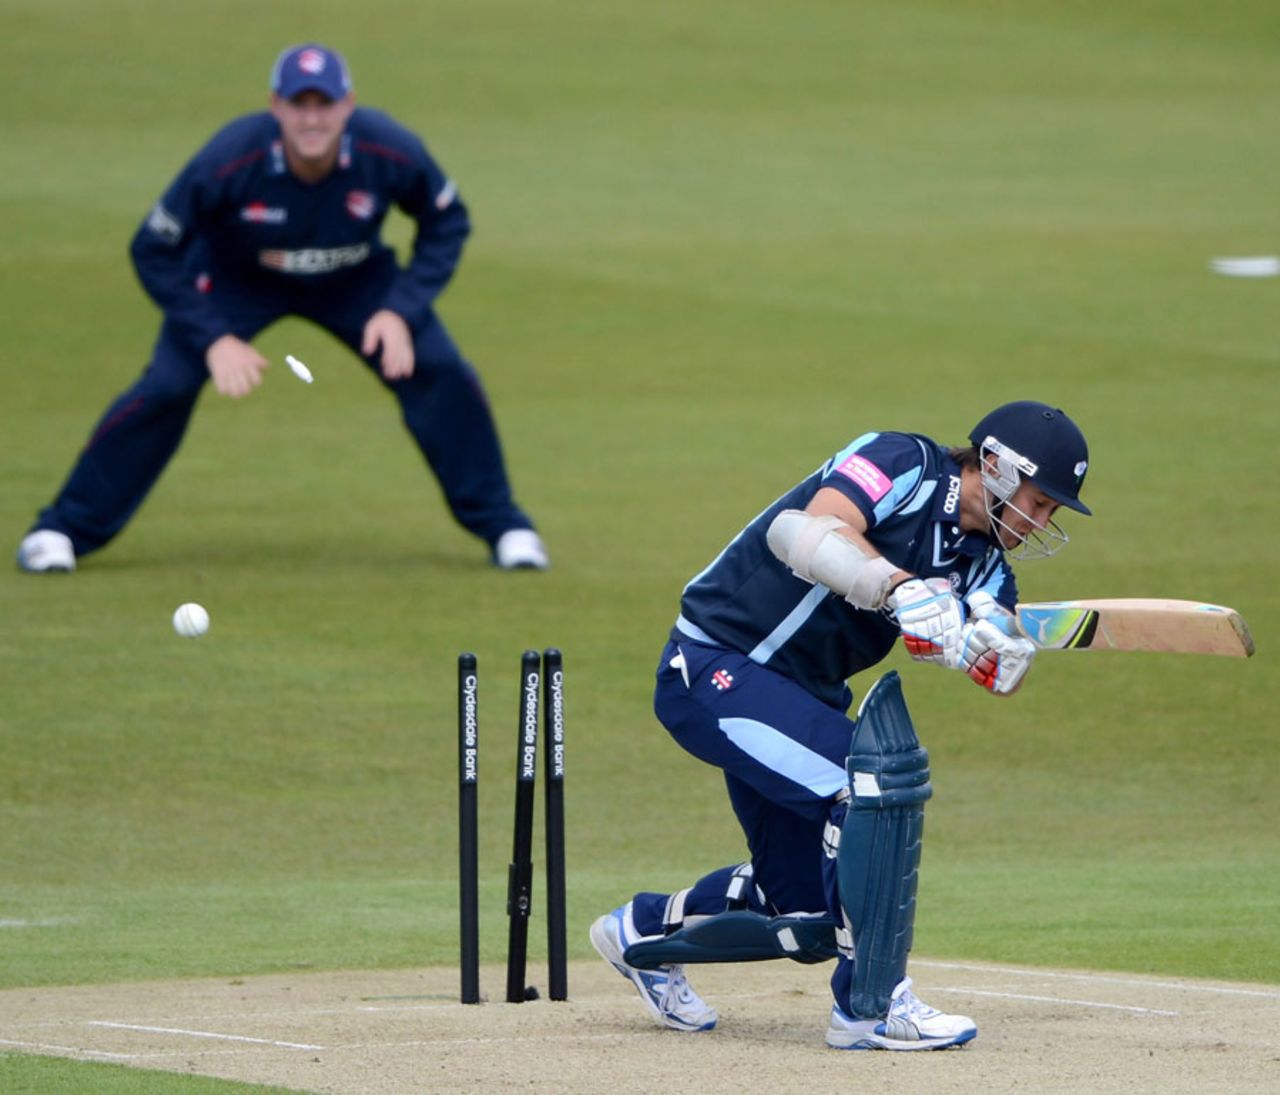 Phil Jaques is bowled first ball by Matt Coles, Yorkshire v Kent, CB40, Group C, Headingley, May 6, 2012